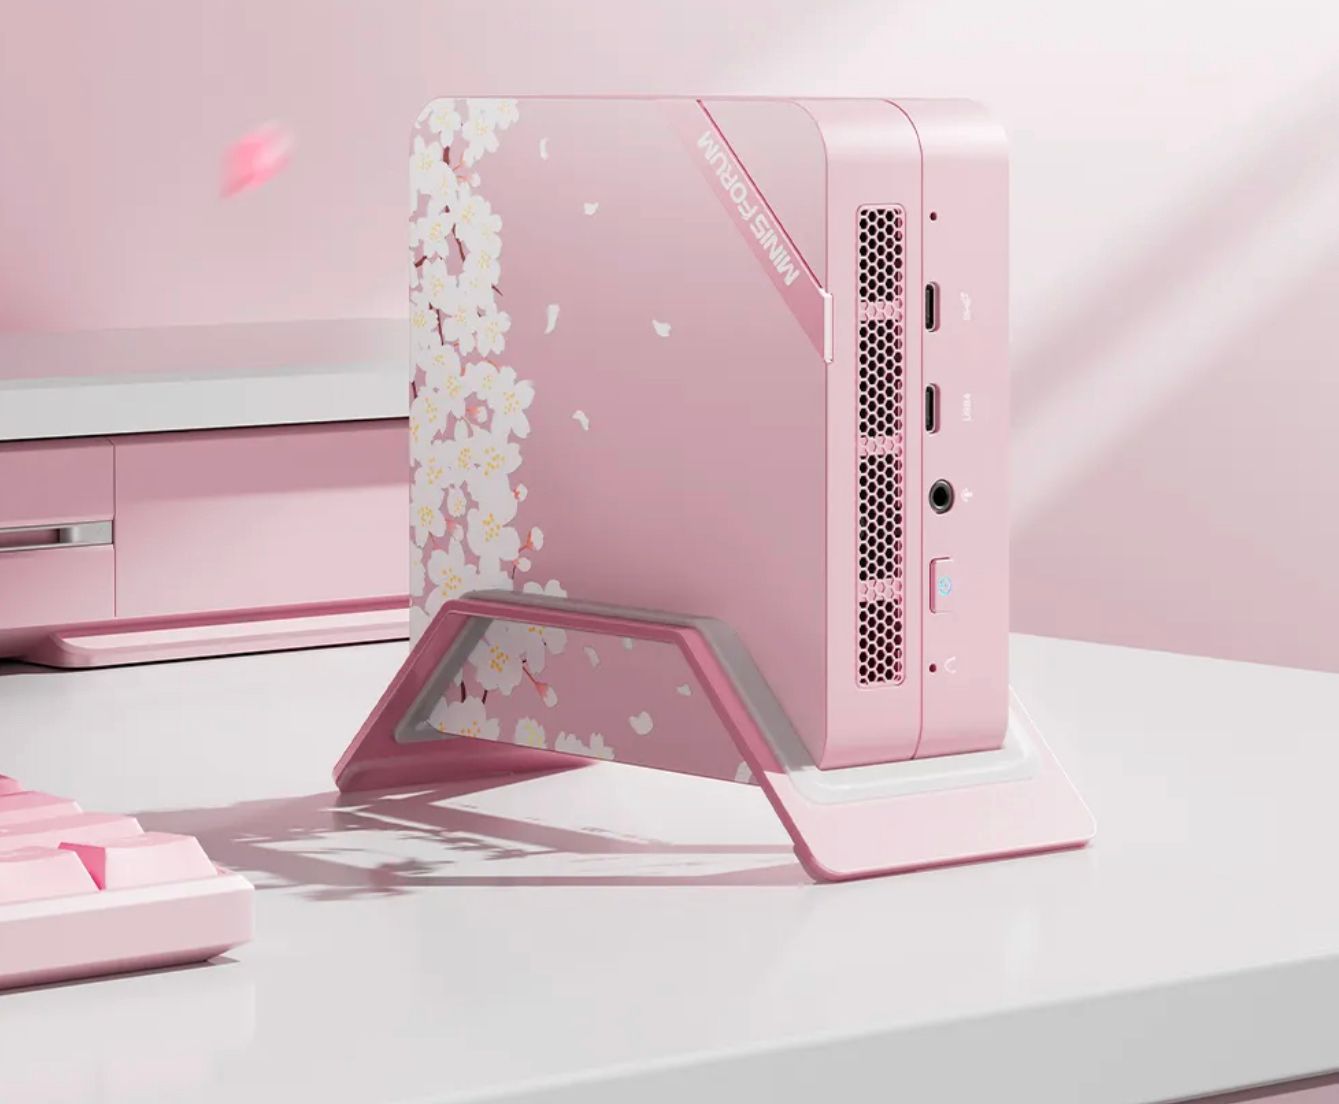 this sakura-themed mini PC might be one of the prettiest pre-builts I’ve ever seen